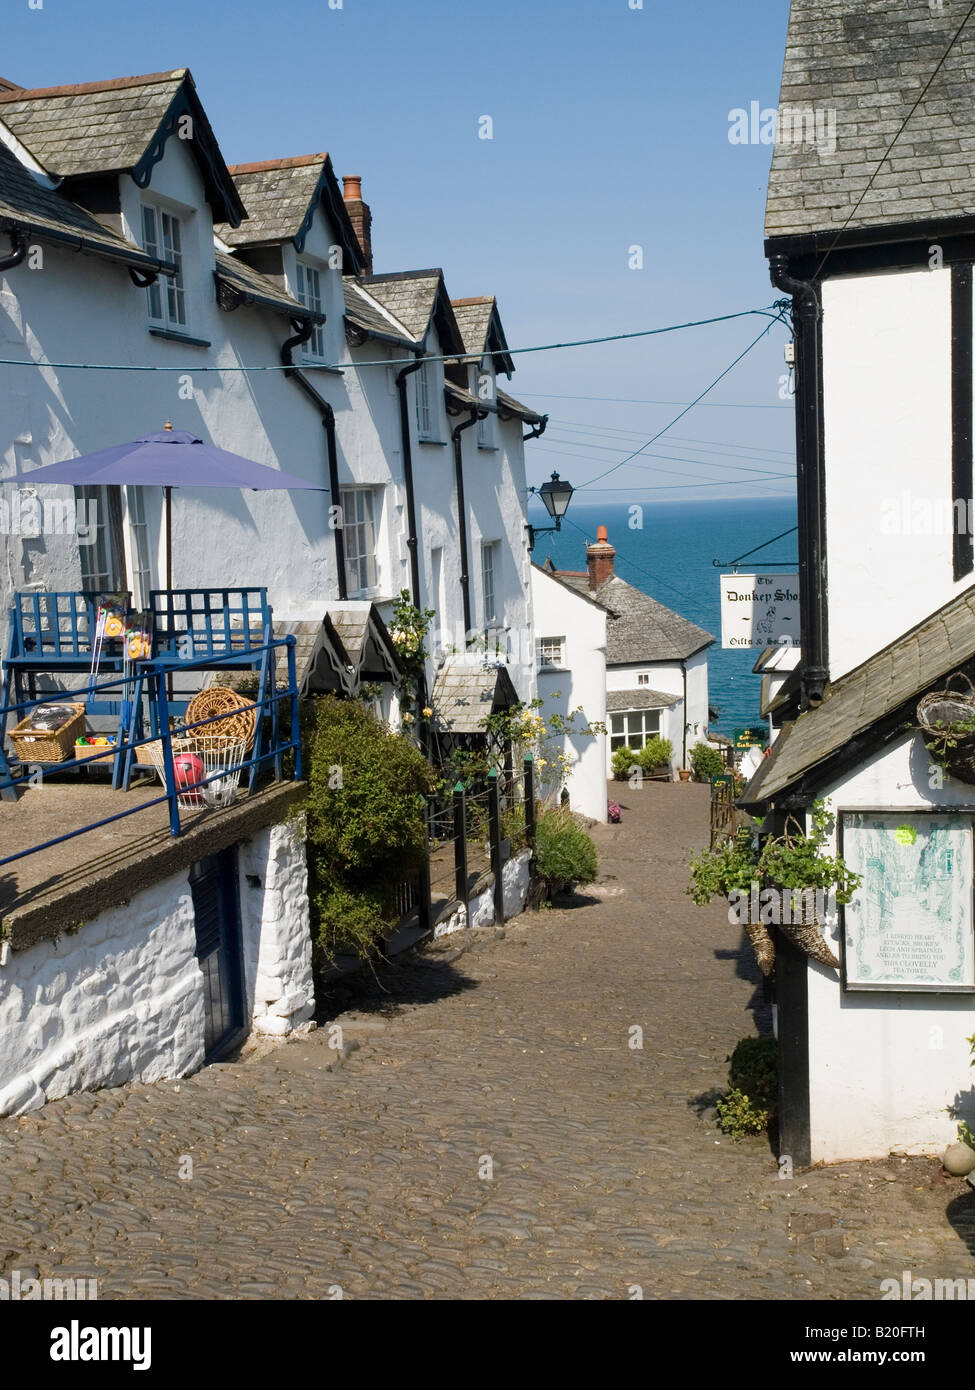 The cobbled street leading down to the harbour area in the historic fishing village of Clovelly, North Devon England UK Stock Photo